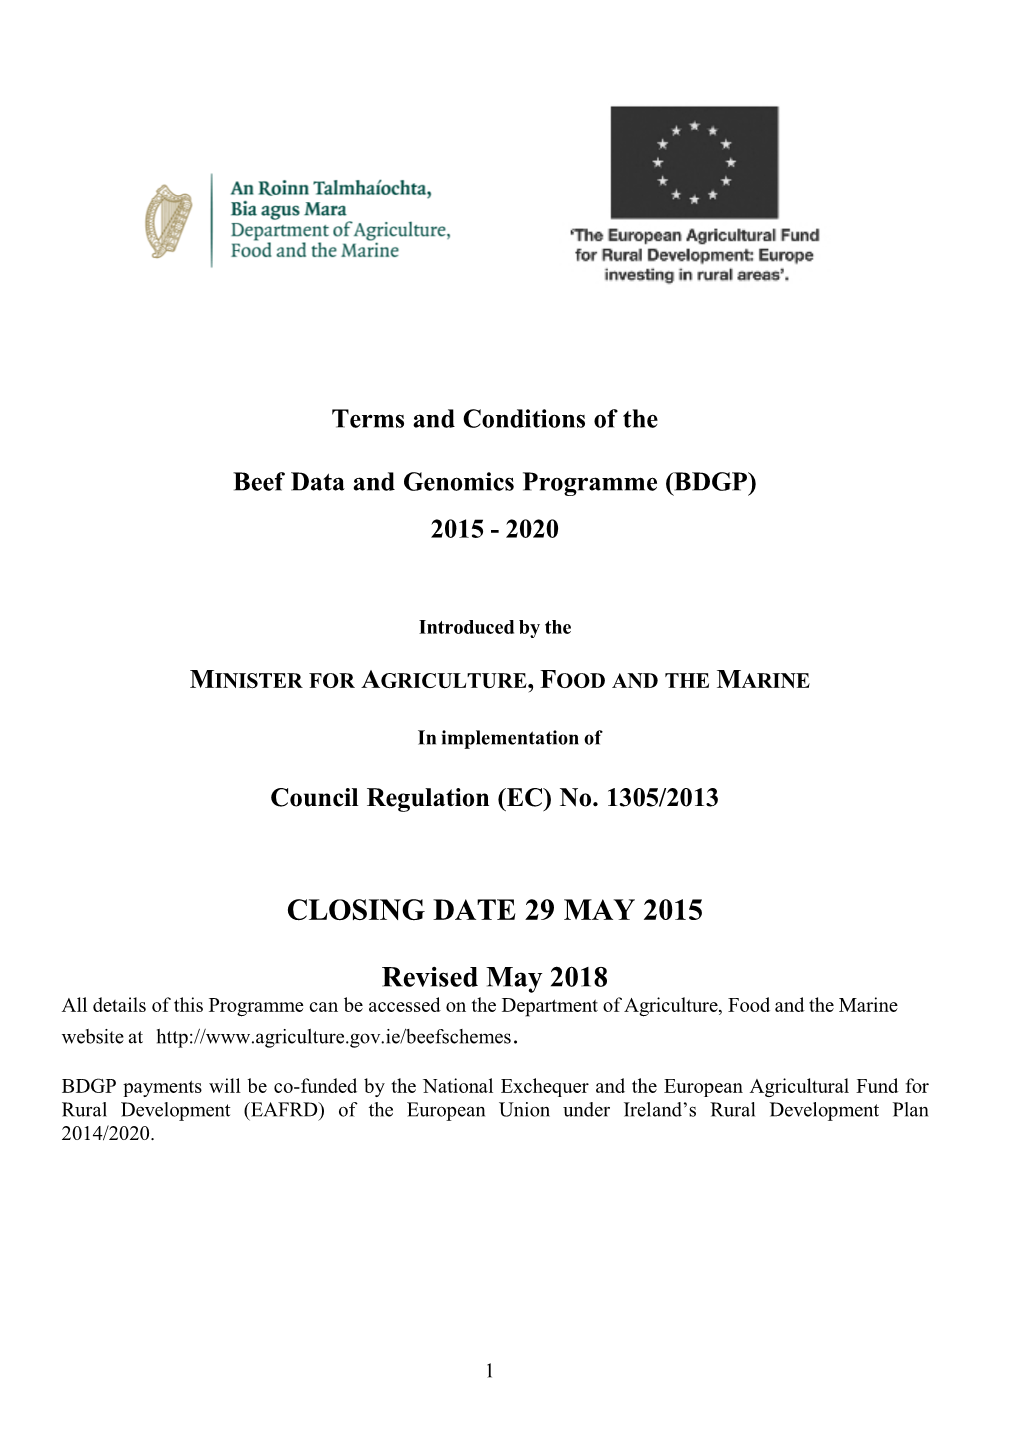 Terms and Conditions of the Beef Data and Genomics Programme